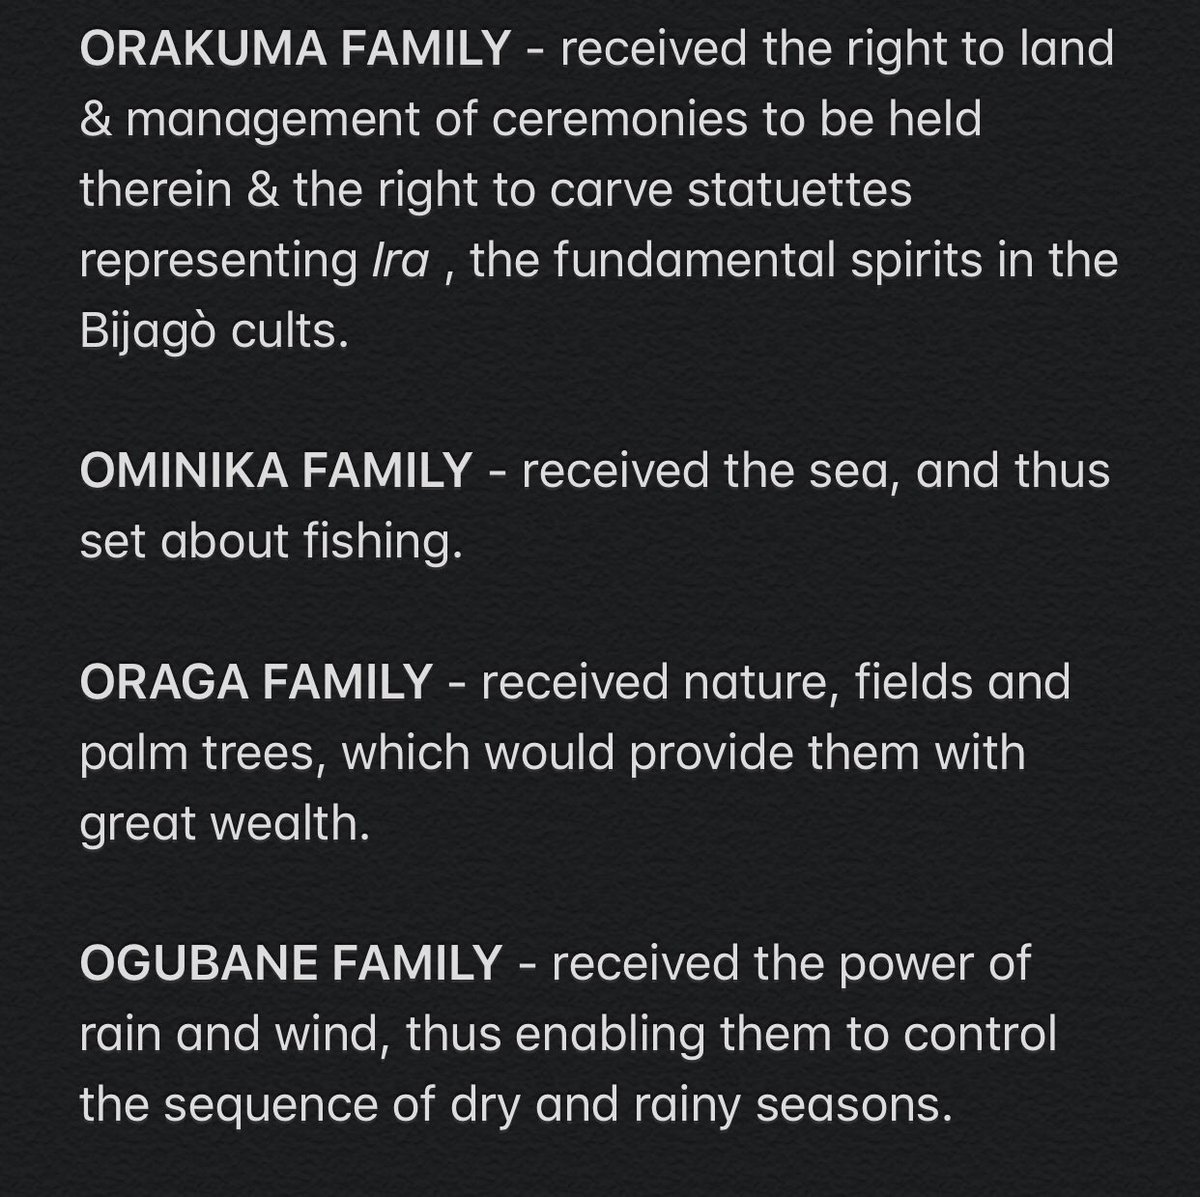 (2/2).. Akapakama had 4 daughters: Orakuma, Ominika, Oraga & Ogubane. Each had several children of their own, & were bestowed special rights.Here’s what each daughter’s family had power over: